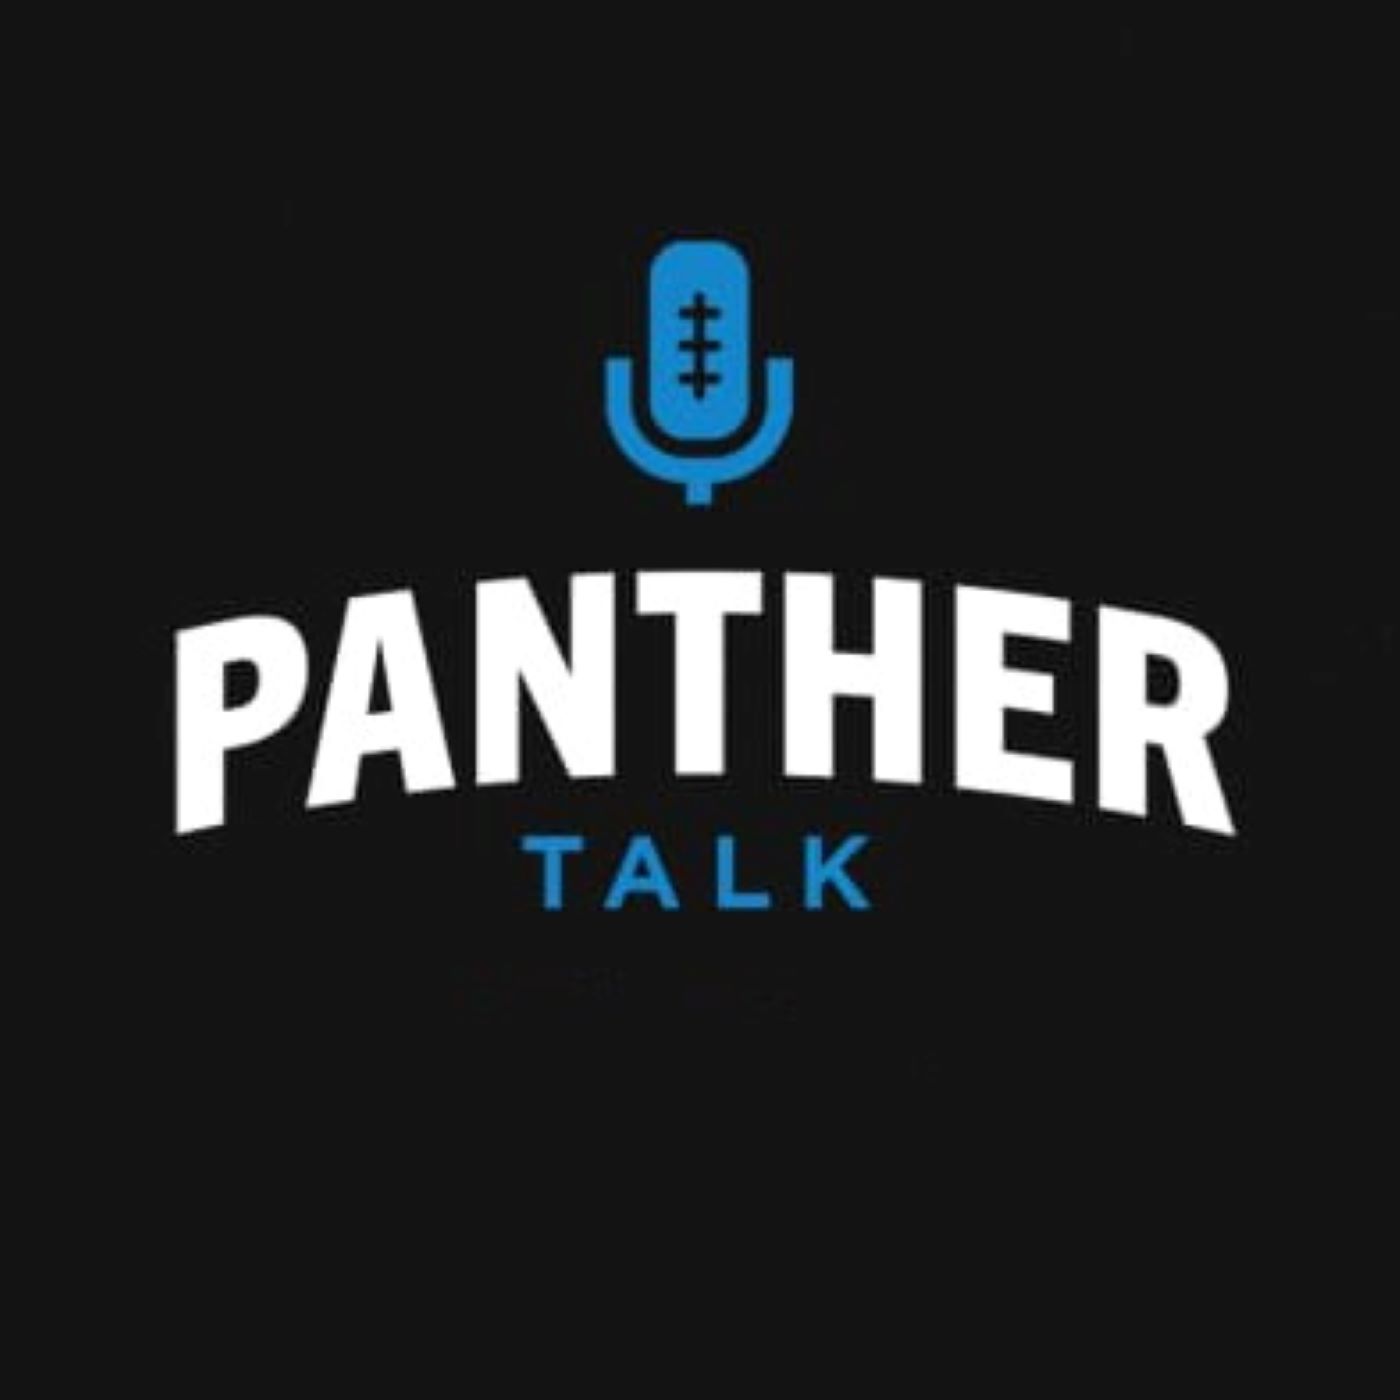 Panther Talk (January 10th)